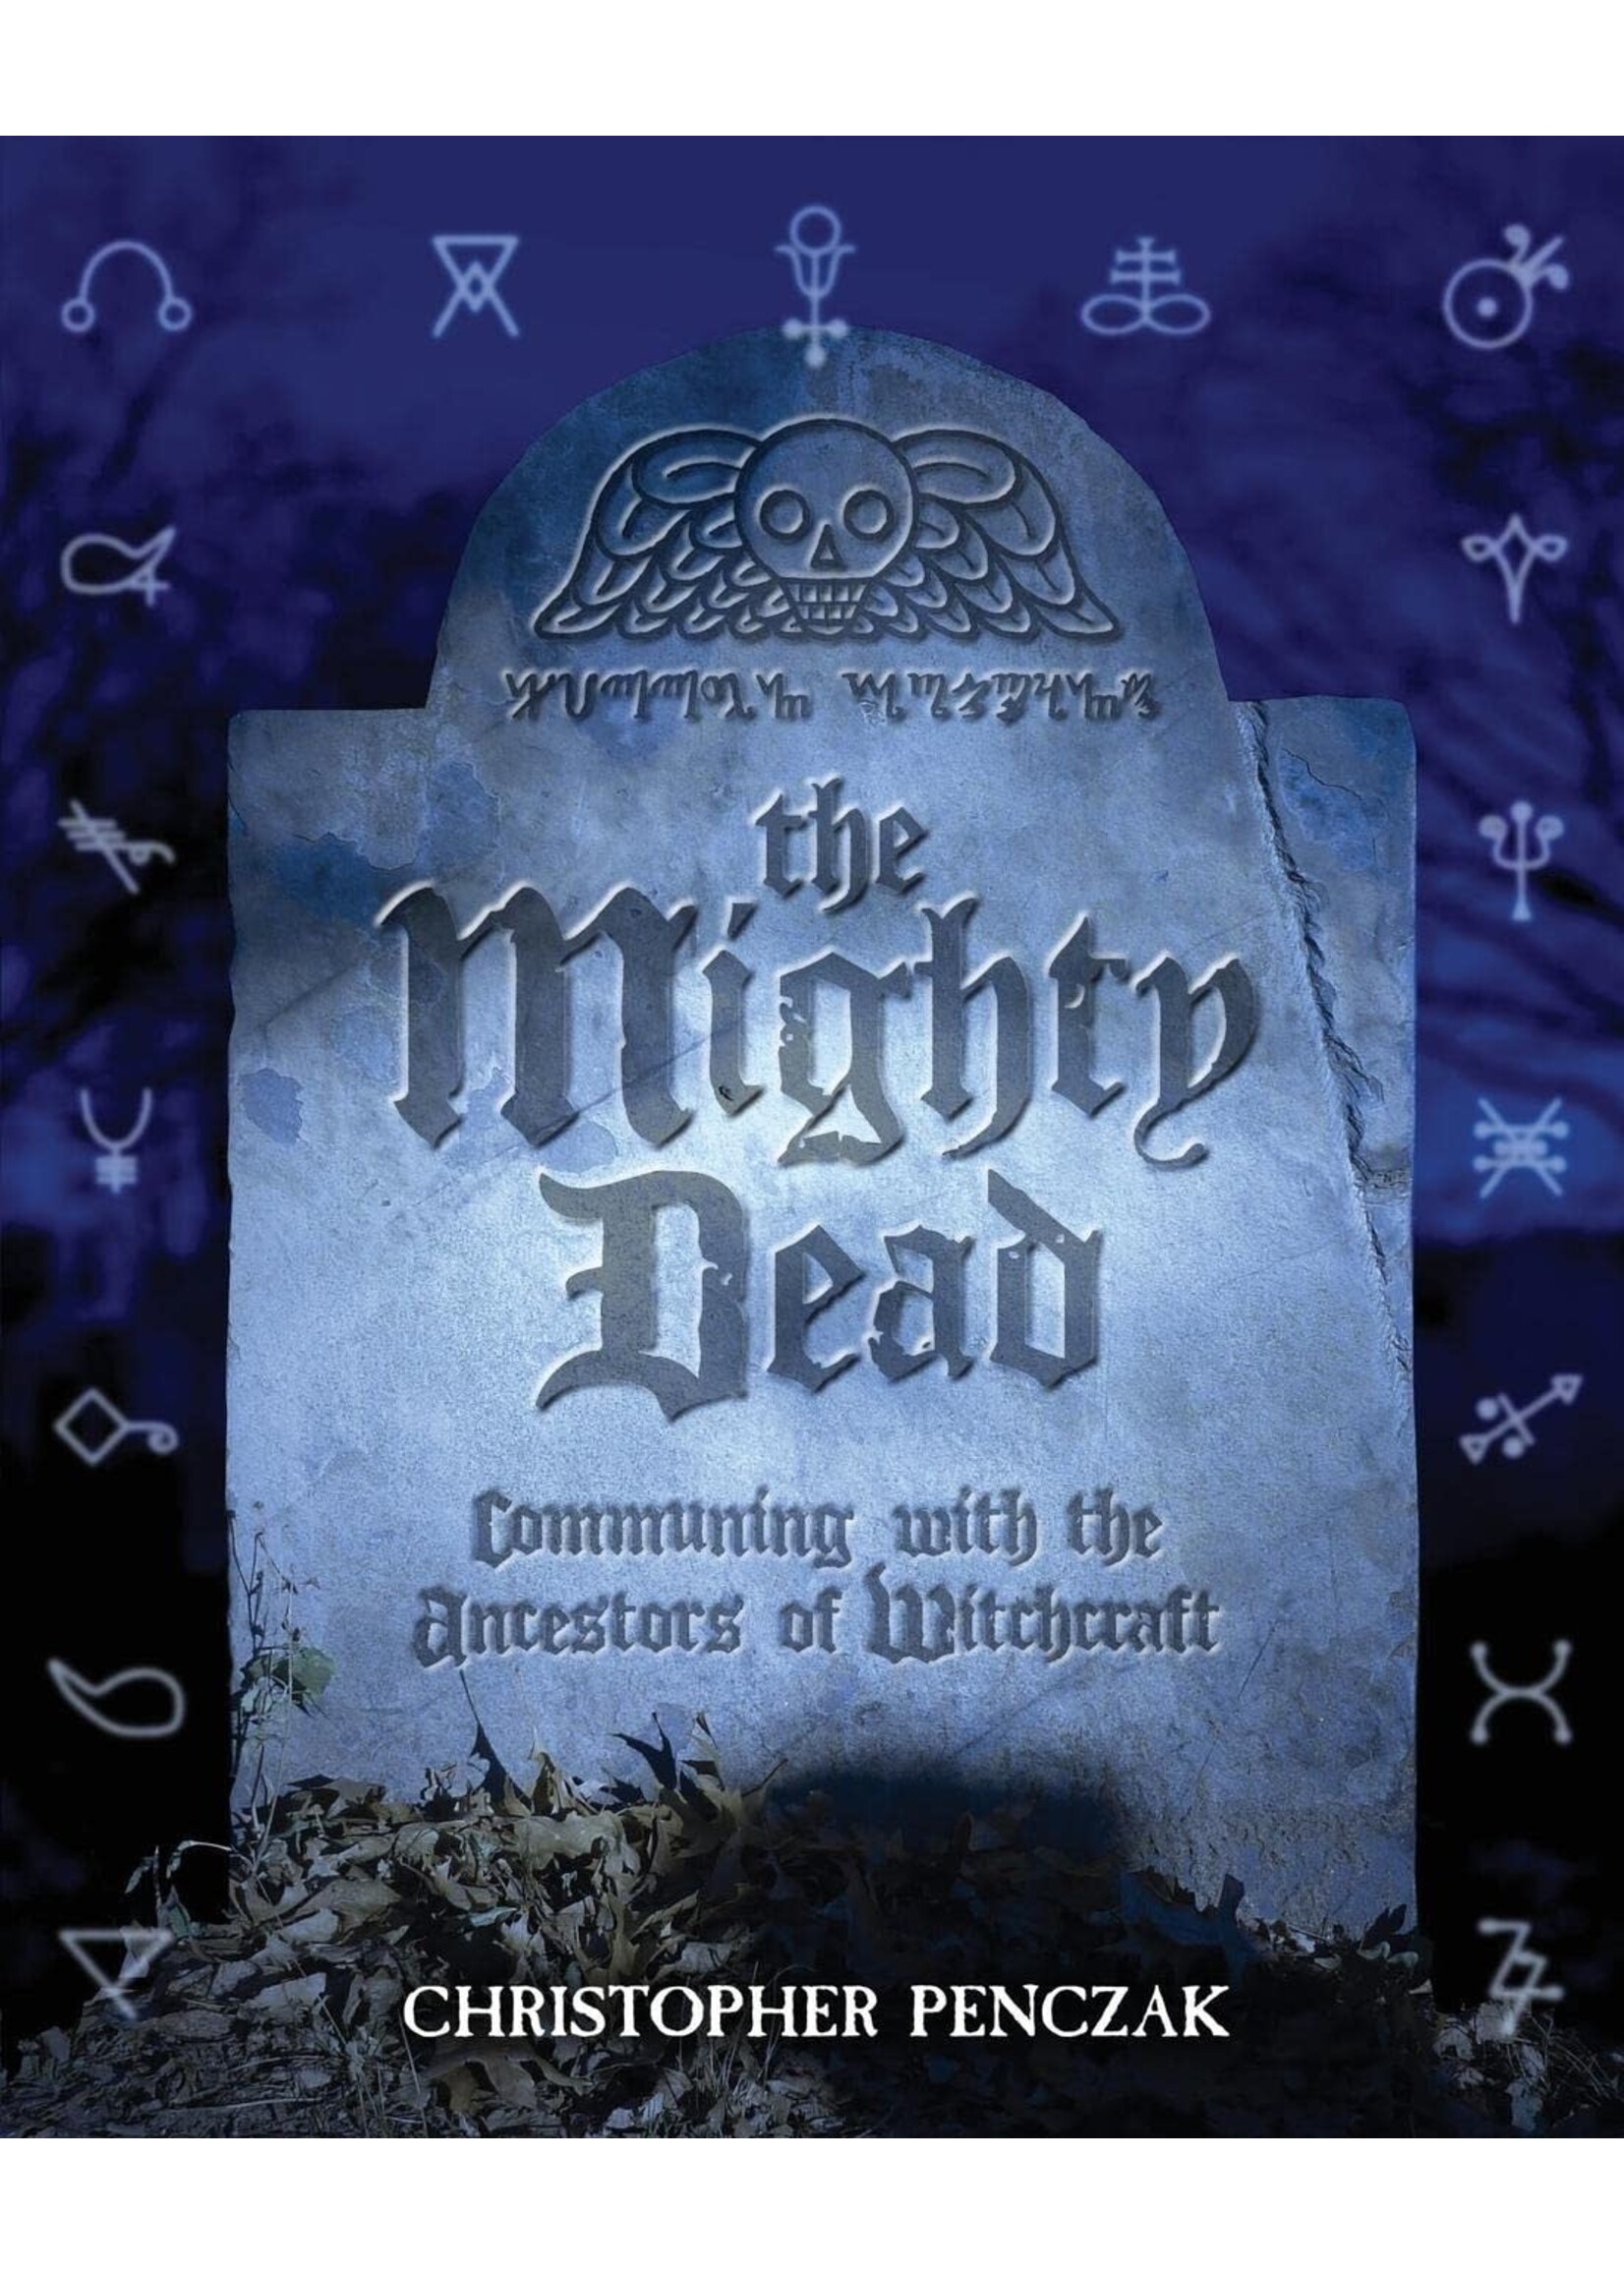 The Mighty Dead: Communing with the Ancestors of Witchcraft by Christopher Penczak